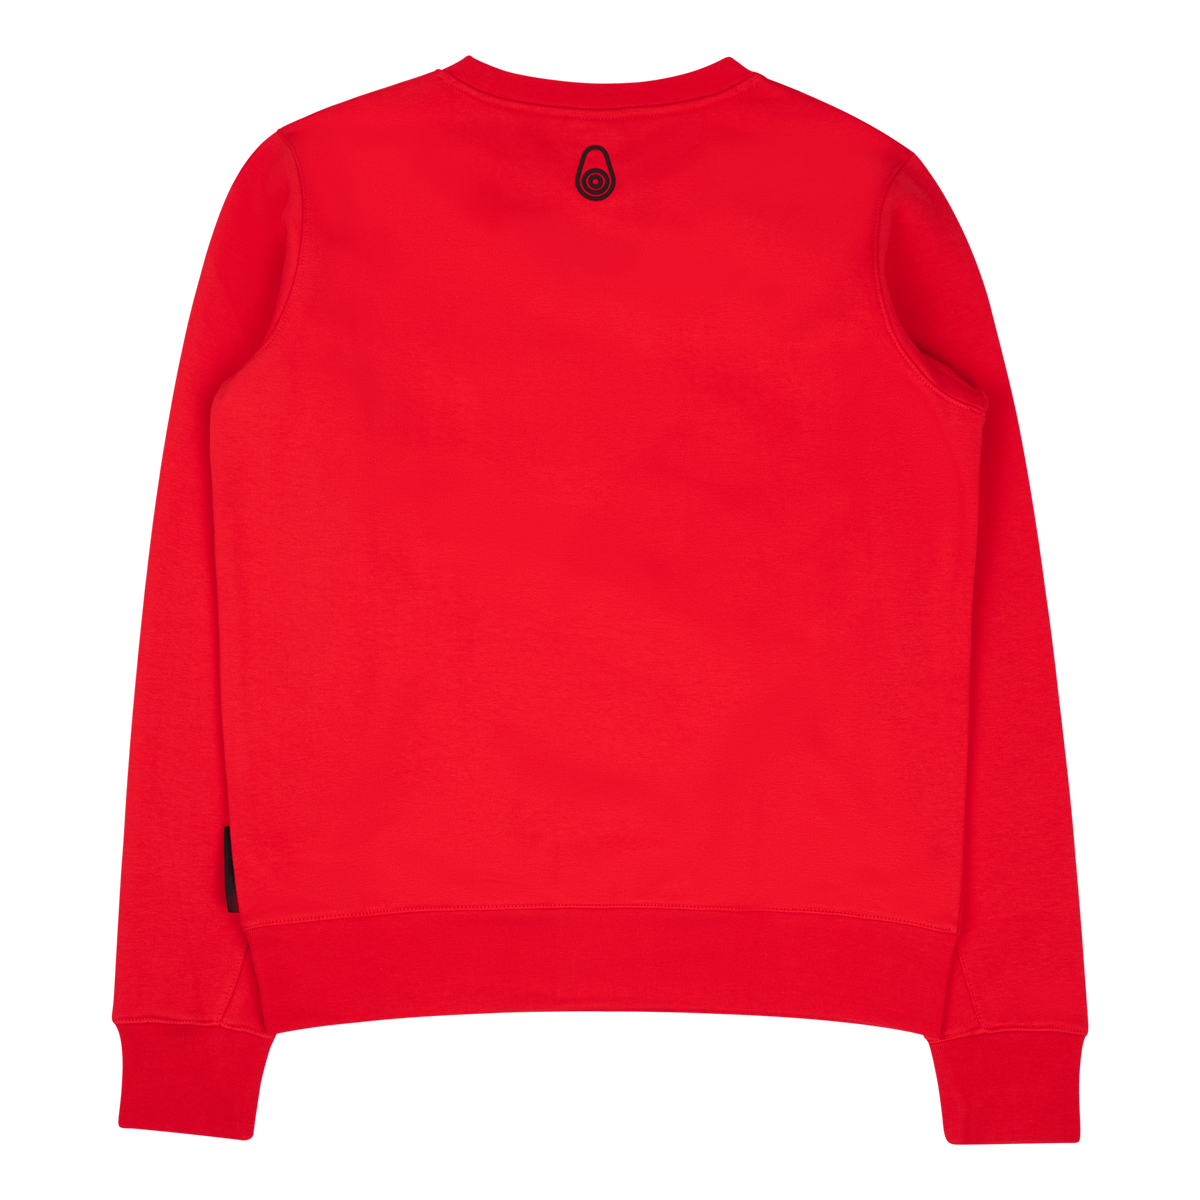 Bowman Logo Sweater Bright Red